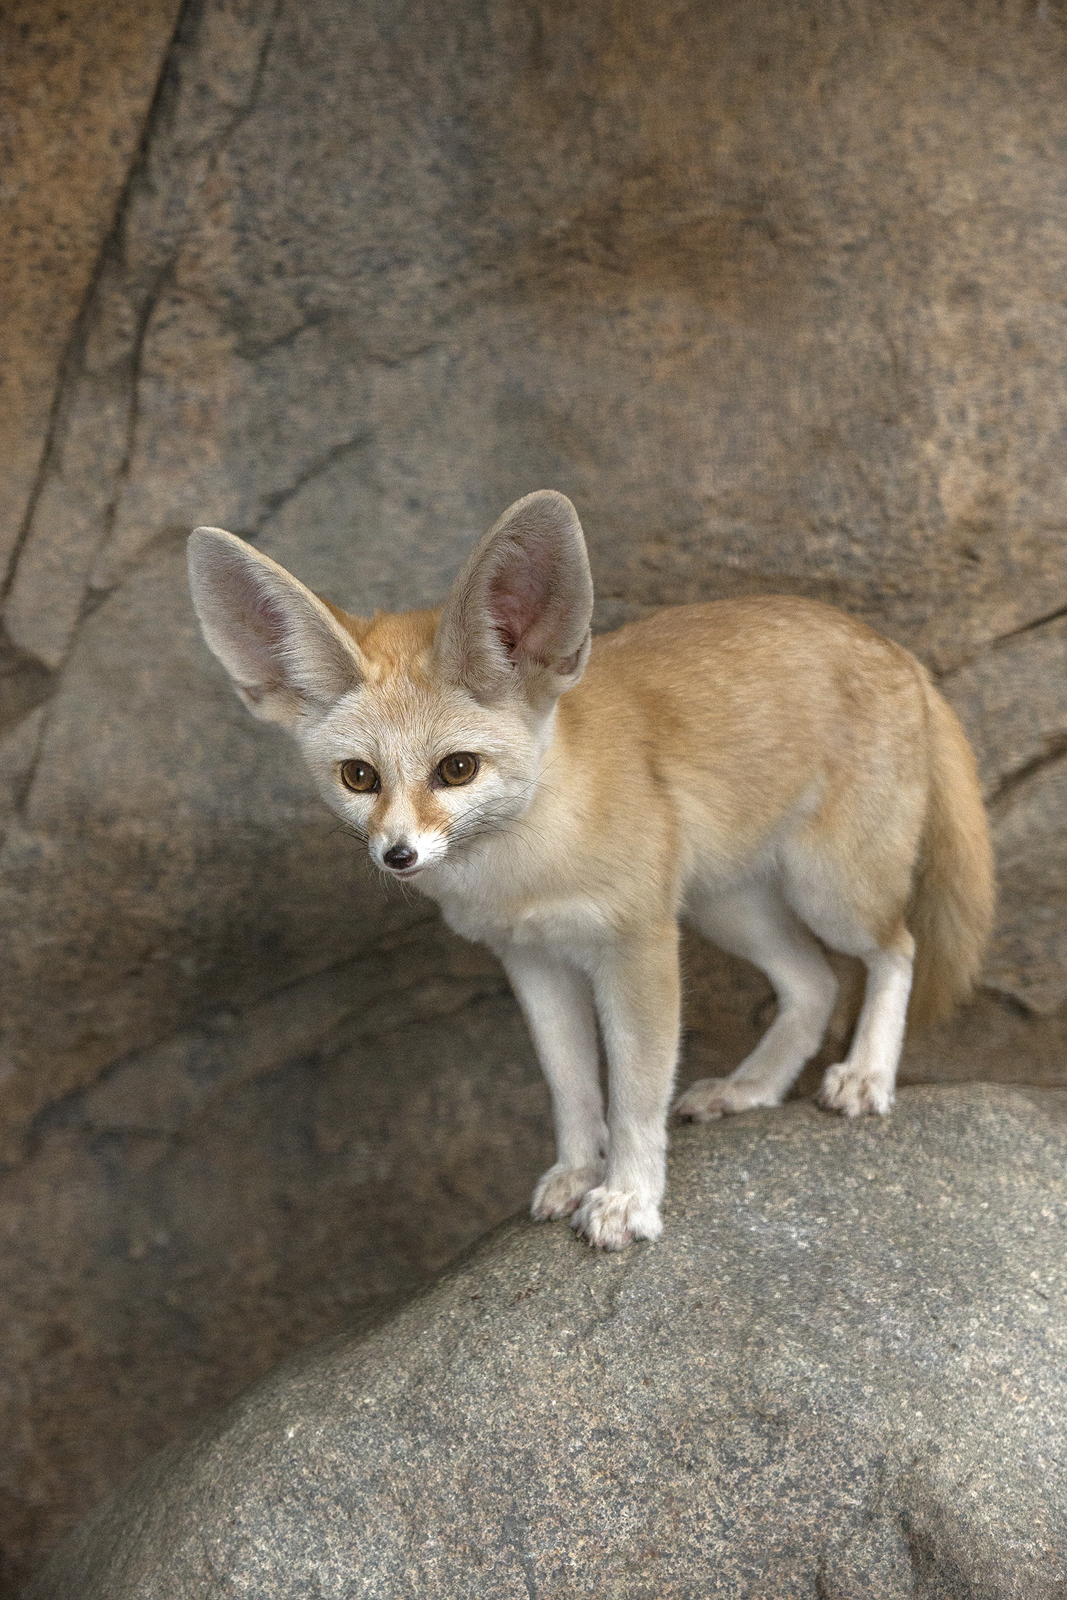 For canids, the fennec fox has the largest ears in relation to its body size. The ears can be half the length of its body, and they do double duty—allowing the fox to hear prey moving around underground, and also helping to dissipate heat under the hot desert sun.